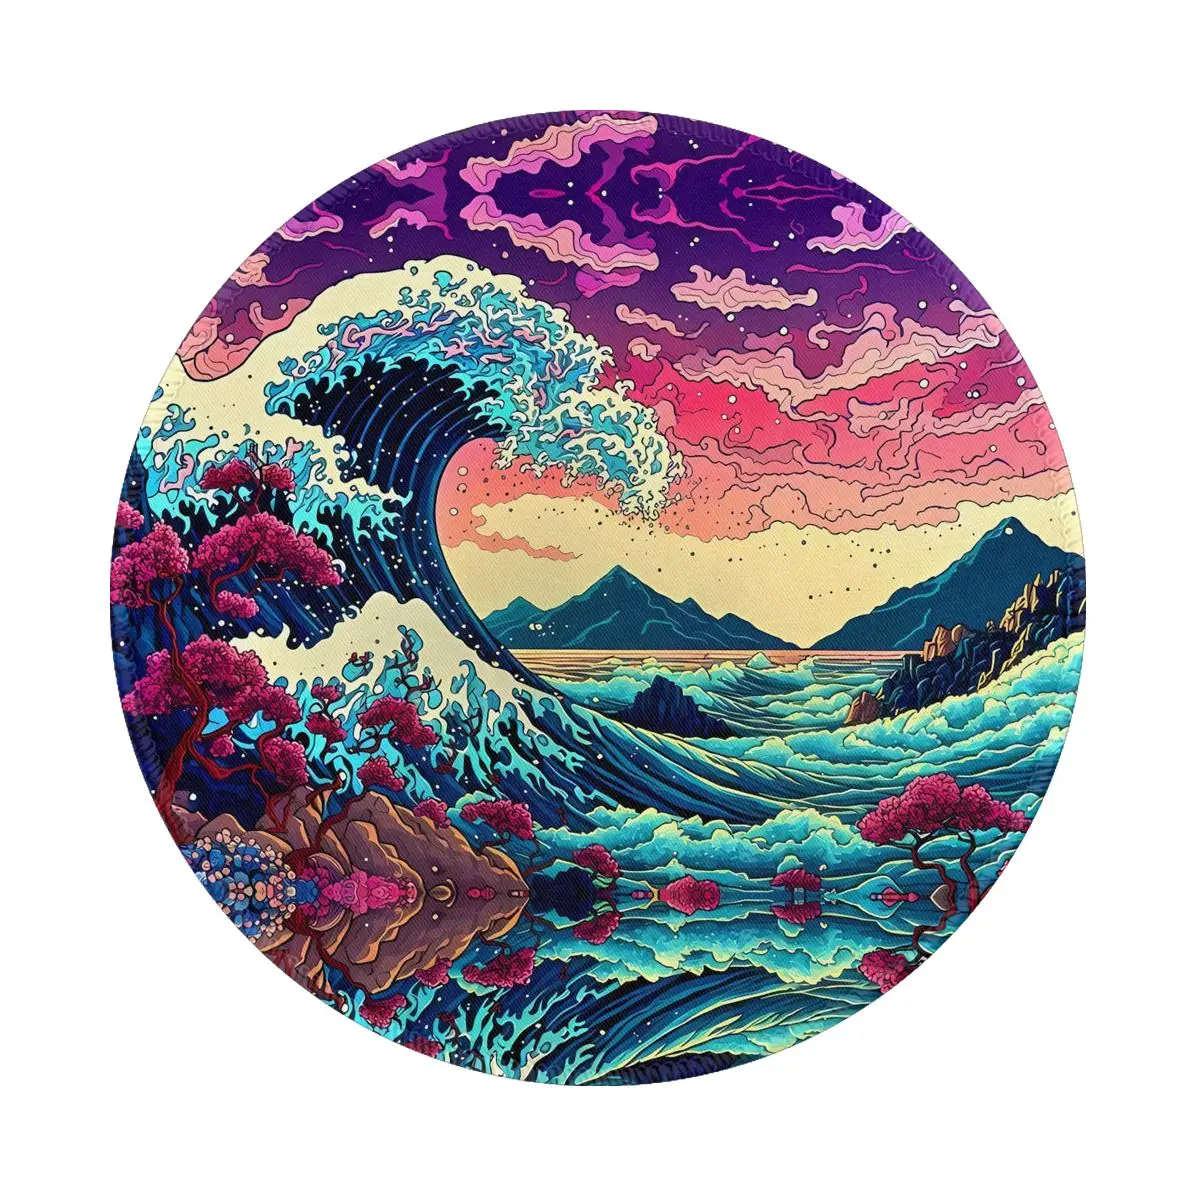 Japan Waves Mouse Pad Beauty Sunset Glow Graphic Rubber Mousepad For Office Home Computer Comfortable Vintage Quality Mouse Mats